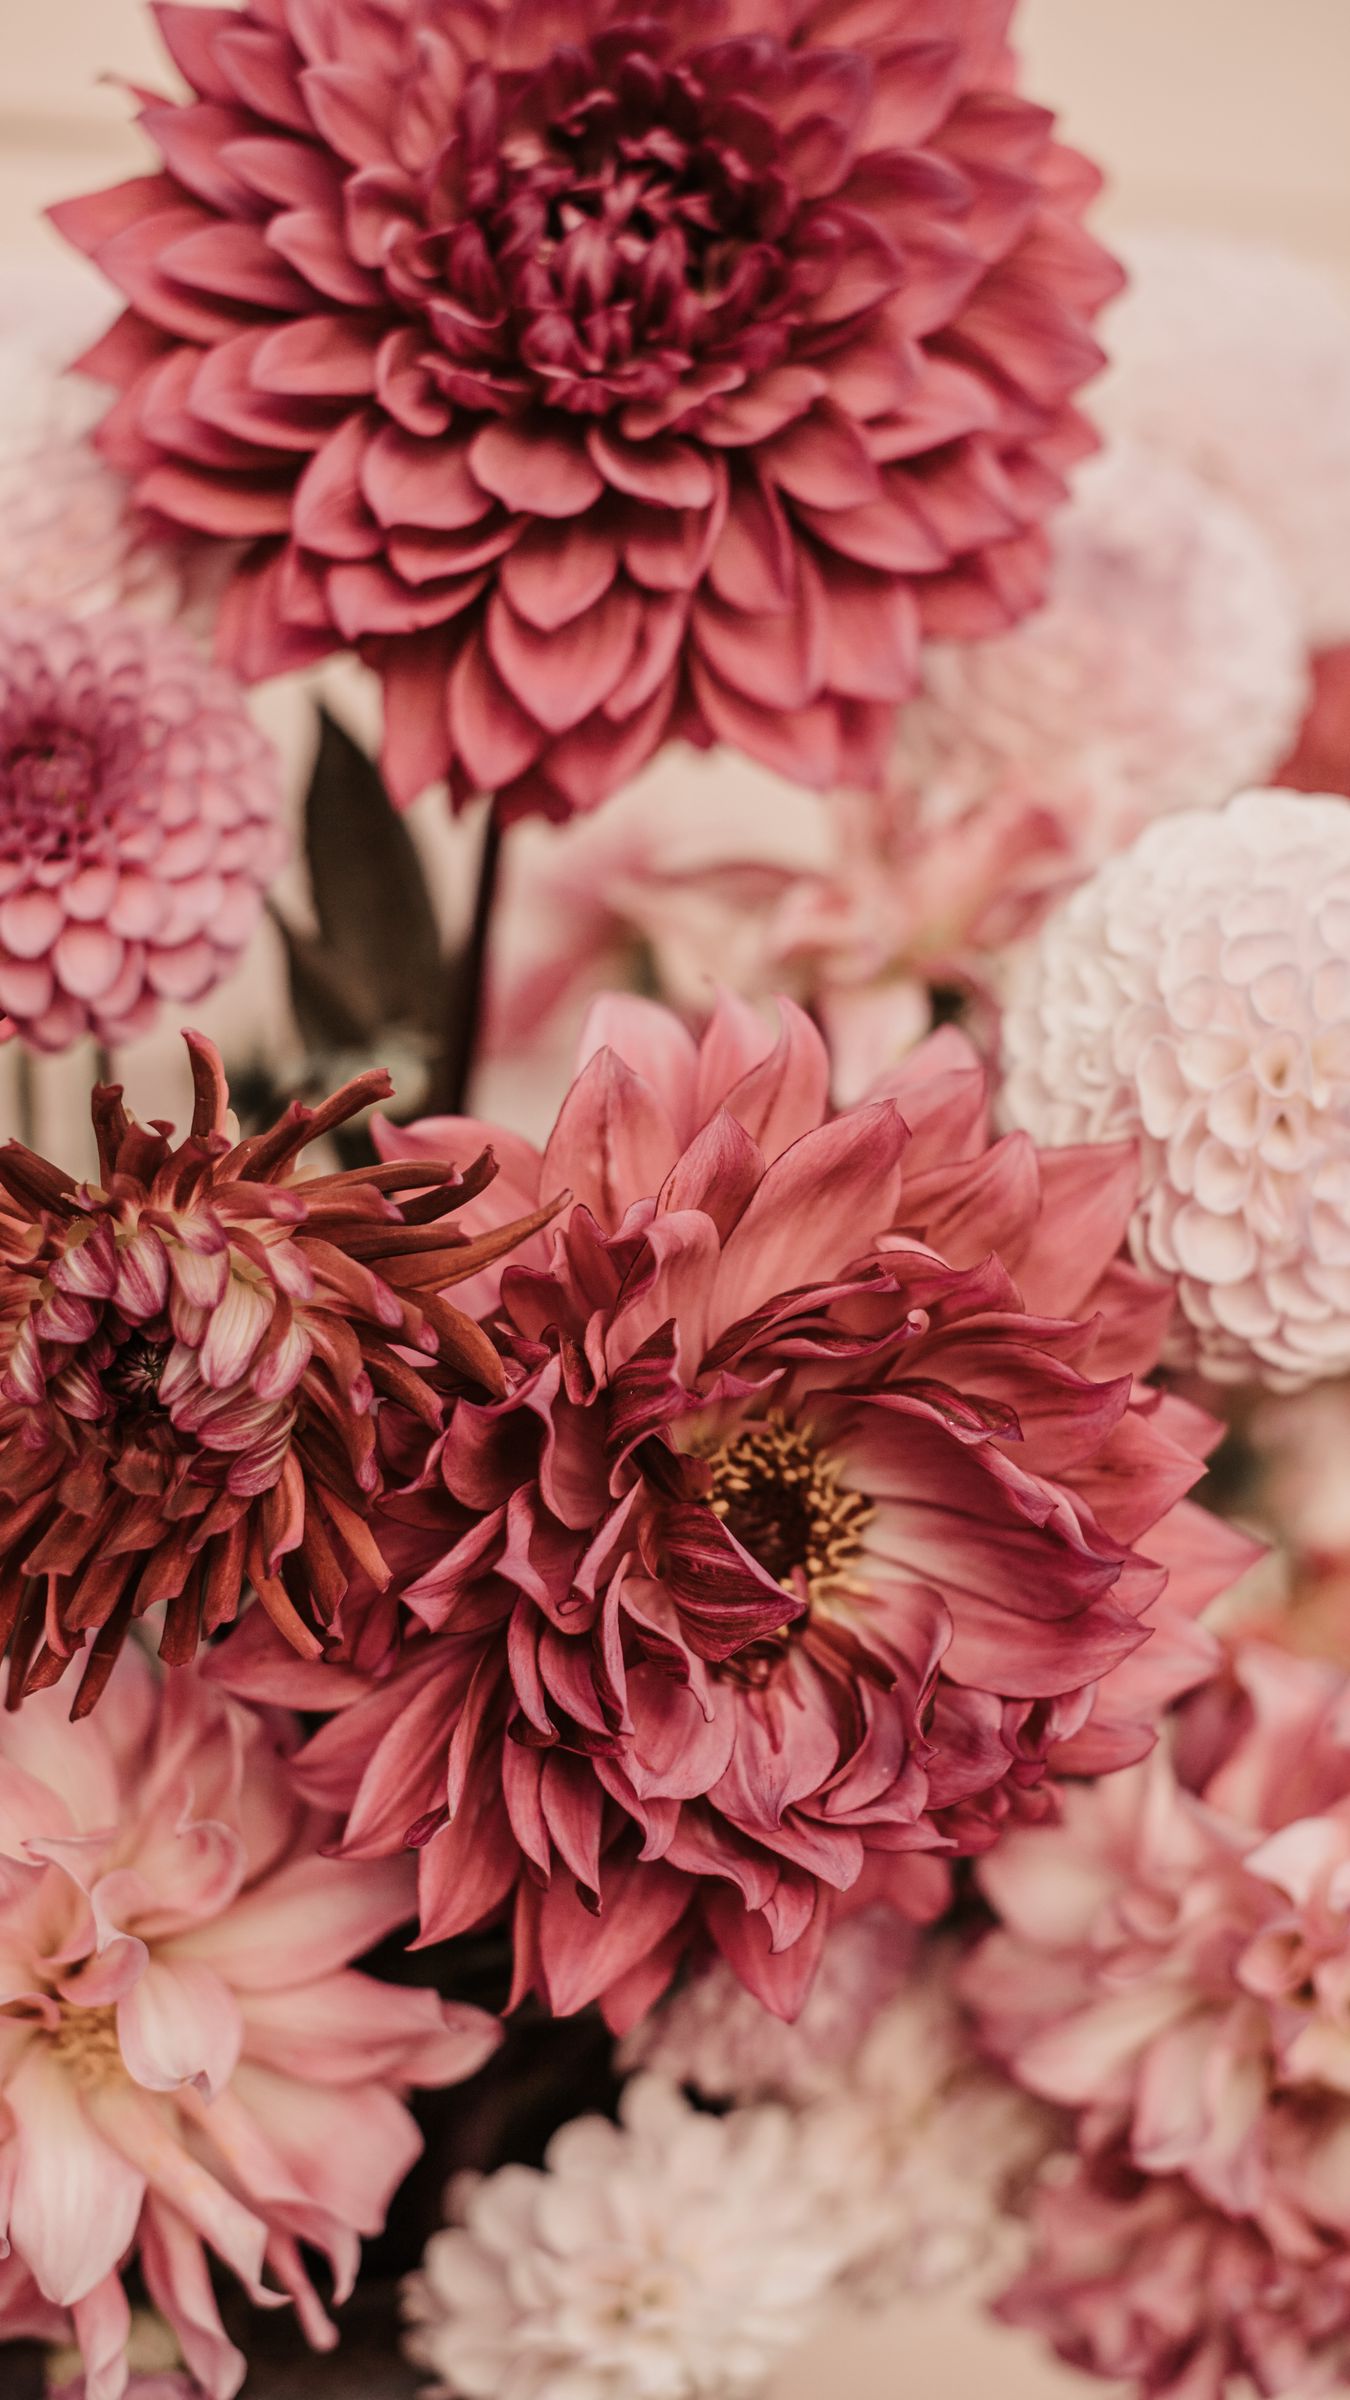 Download wallpaper 1350x2400 dahlias, flowers, bouquet, pink iphone 8+/7+/6s+/for parallax HD background